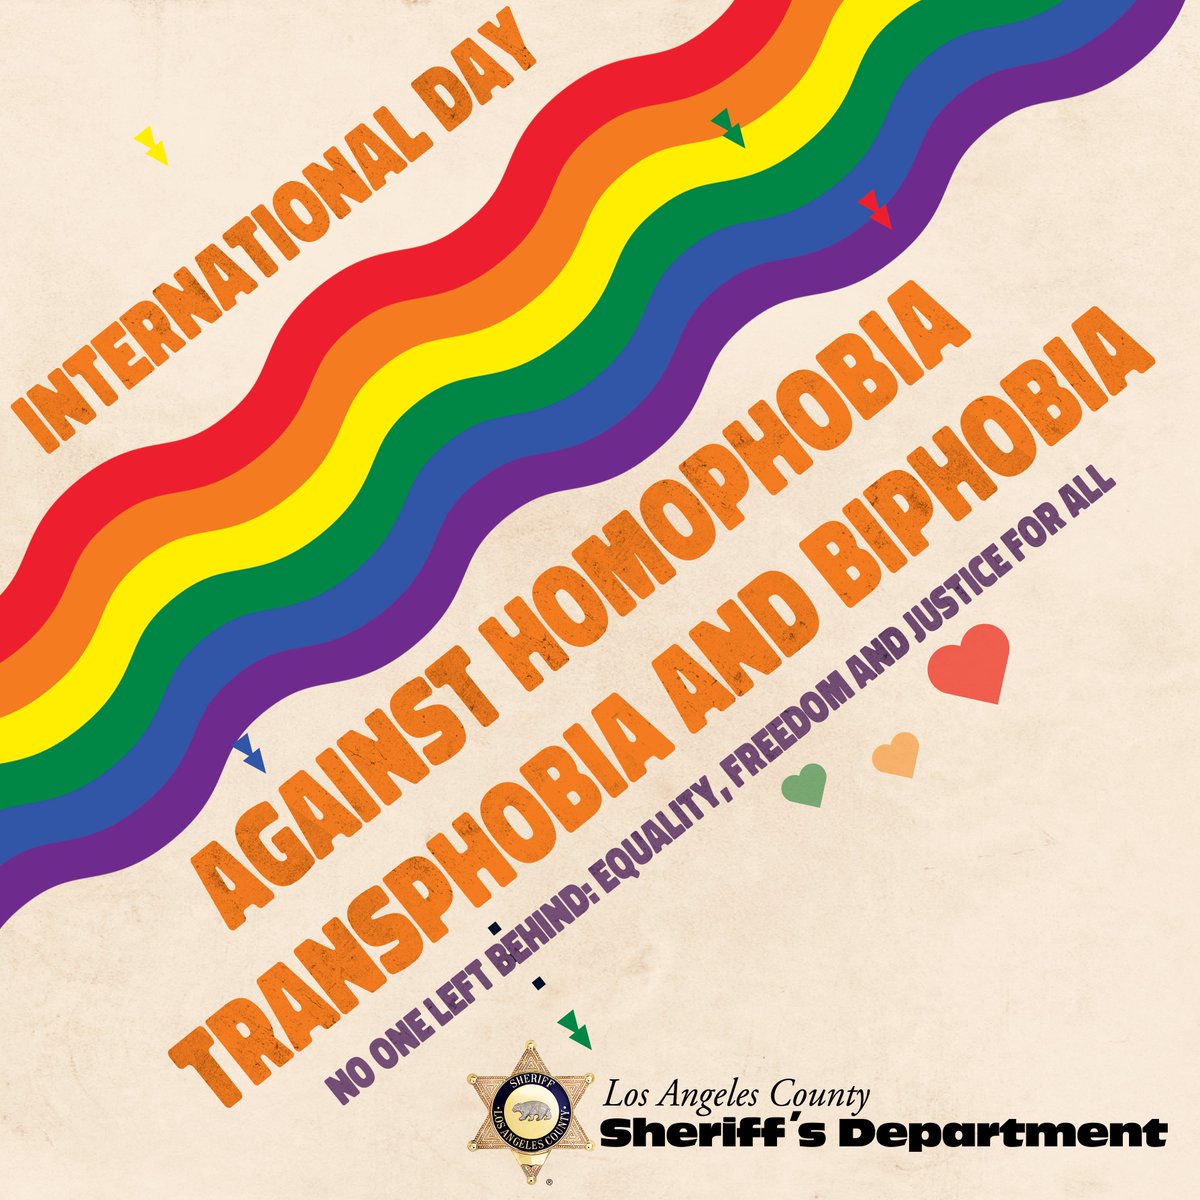 Today, on International Day Against Homophobia, Biphobia, & Transphobia, we stand in solidarity with the LGBTQ+ community. Discrimination & hate have no place in our society. We are committed to fostering a safe & inclusive environment for all everyone.